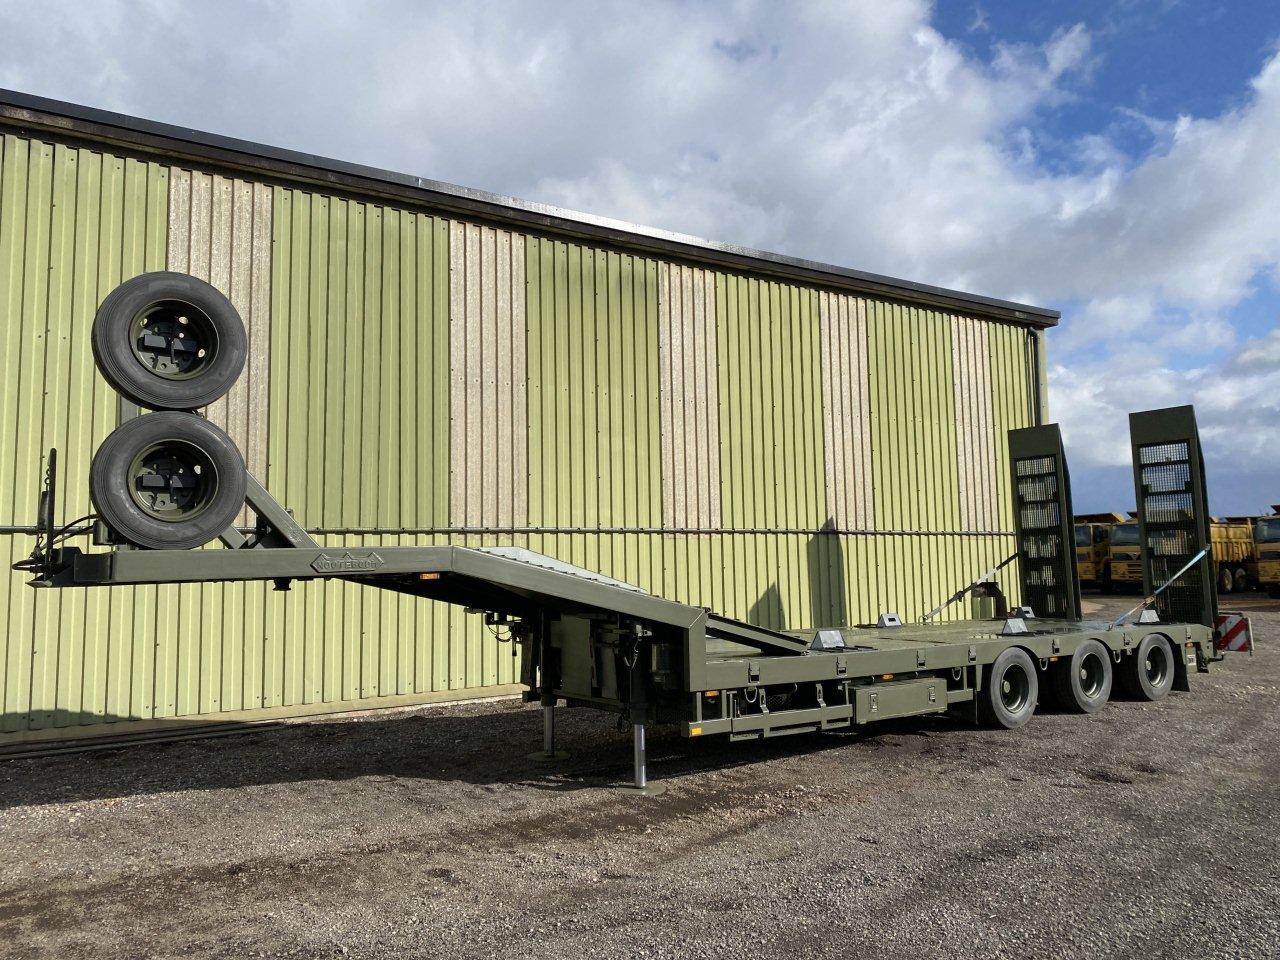 military vehicles for sale - Nooteboom Semi Low Loader Trailer